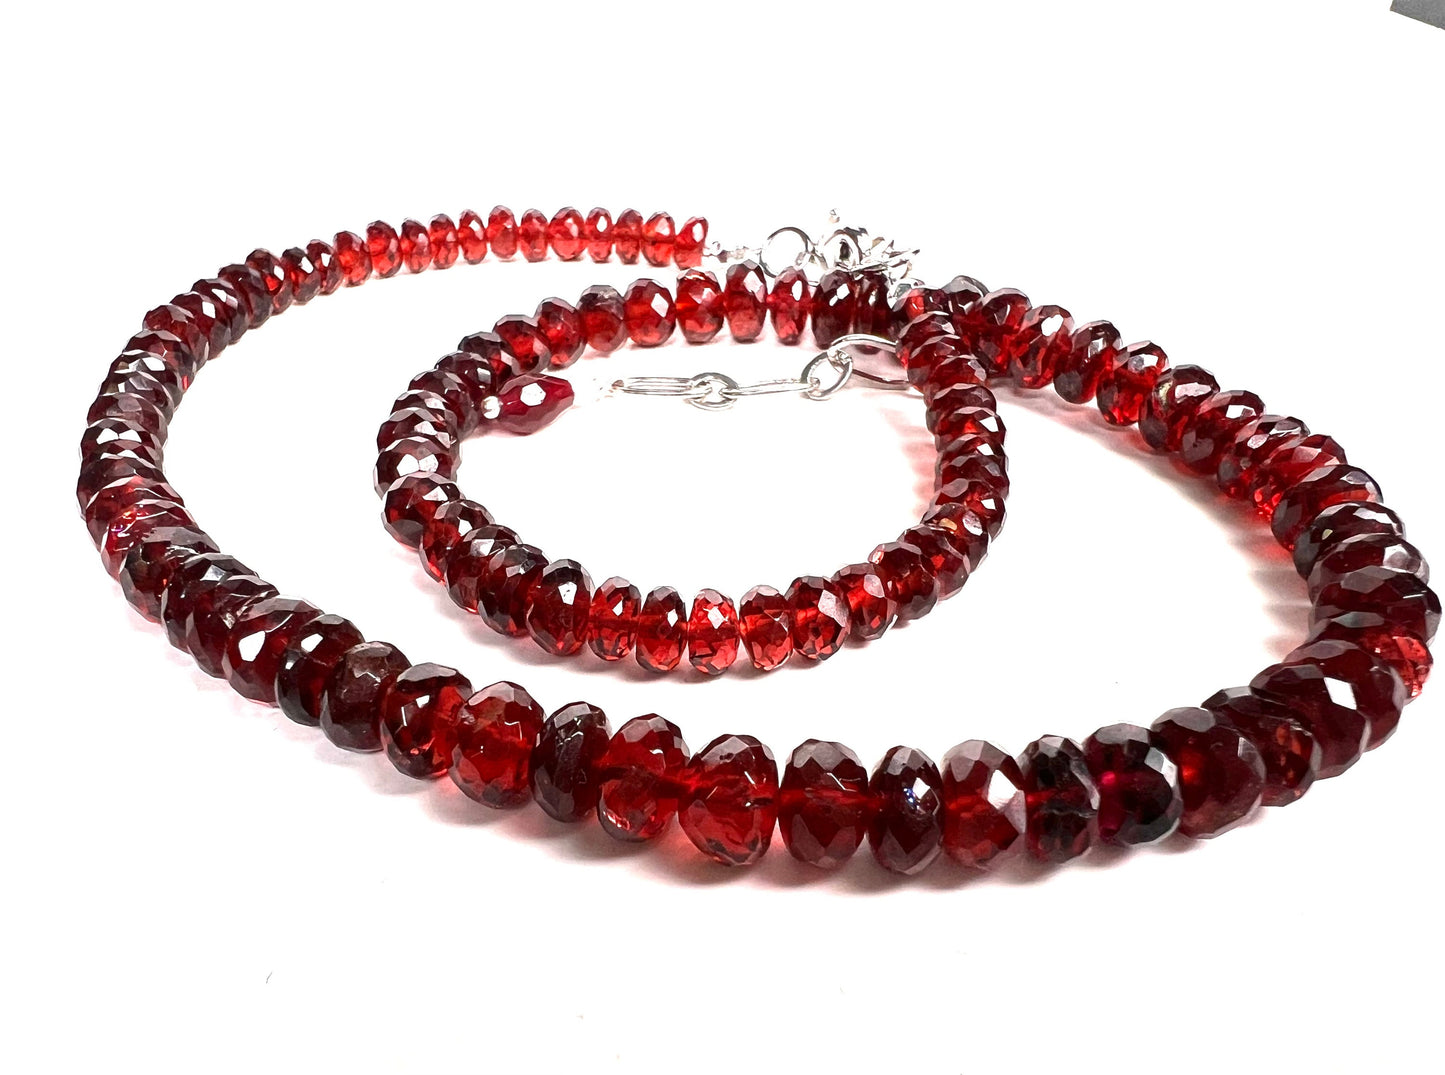 Genuine Garnet large AAA Faceted Rondelle Graduated 5-7mm Necklace with optional 3" Rhodium Extender Chain, January Birthstone